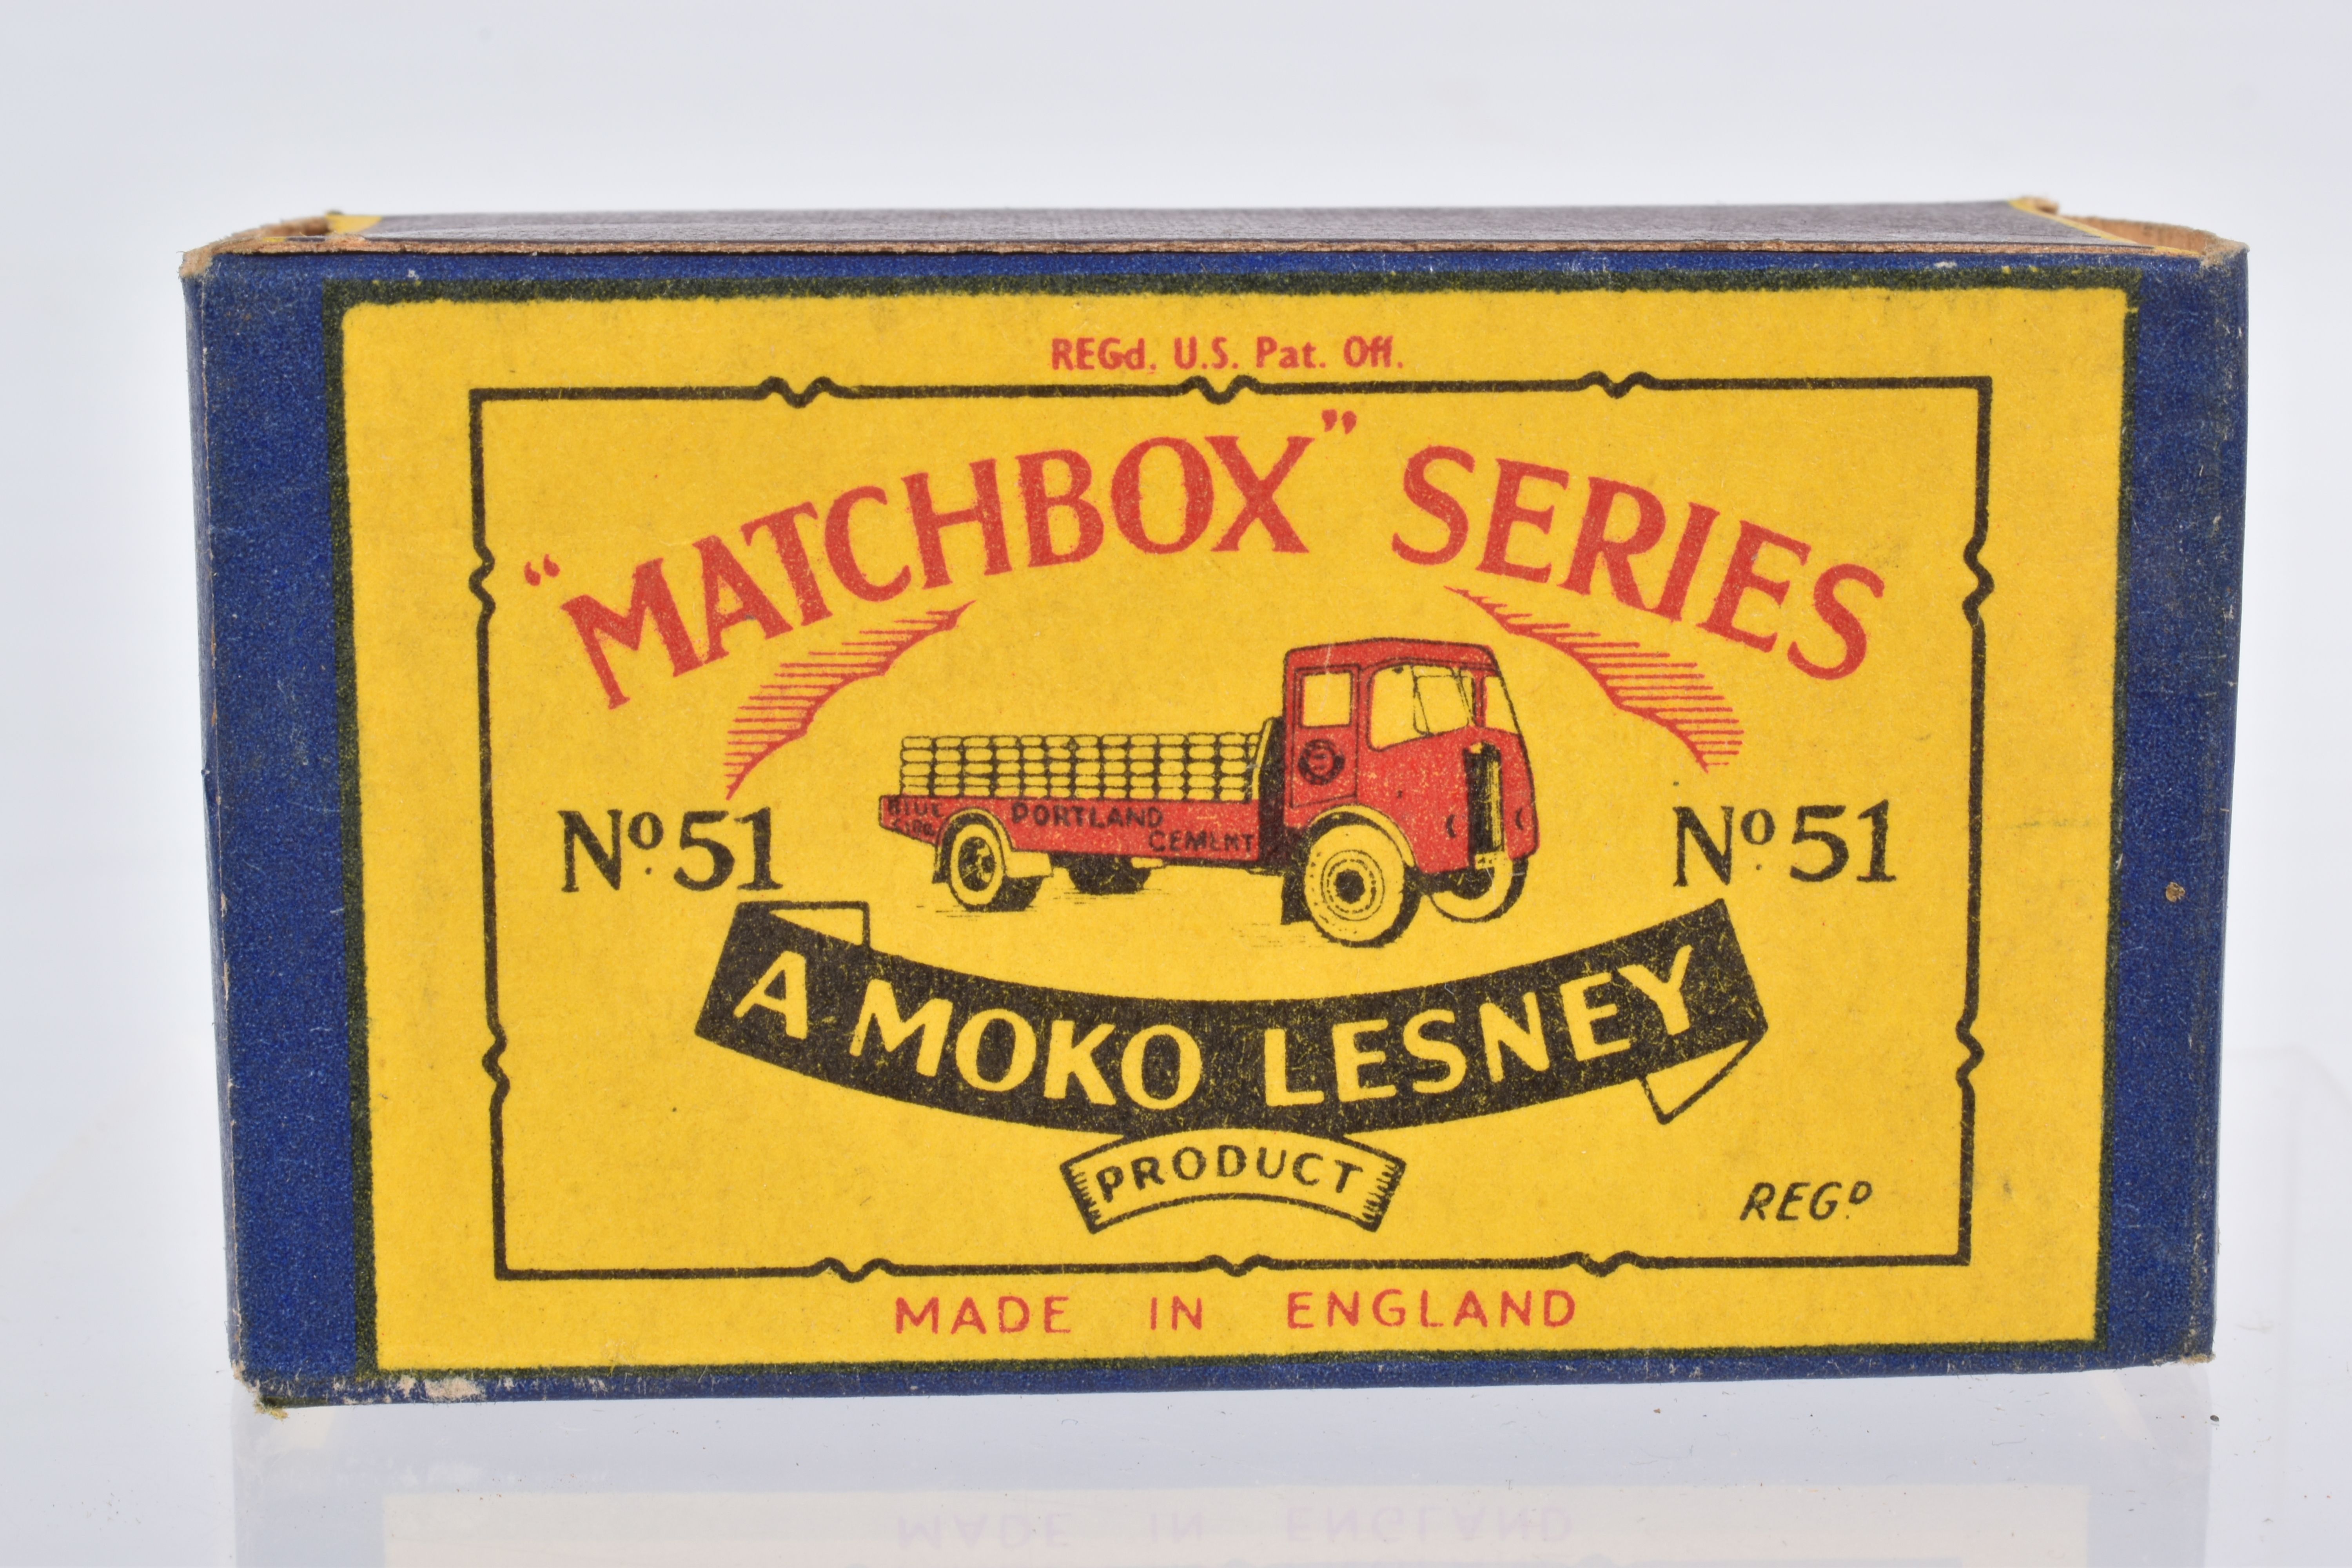 SEVEN BOXED MOKO LESNEY MATCHBOX SERIES LORRY AND TRUCK MODELS, E.R.F. Road Tanker 'Esso', No.11, - Image 40 of 44